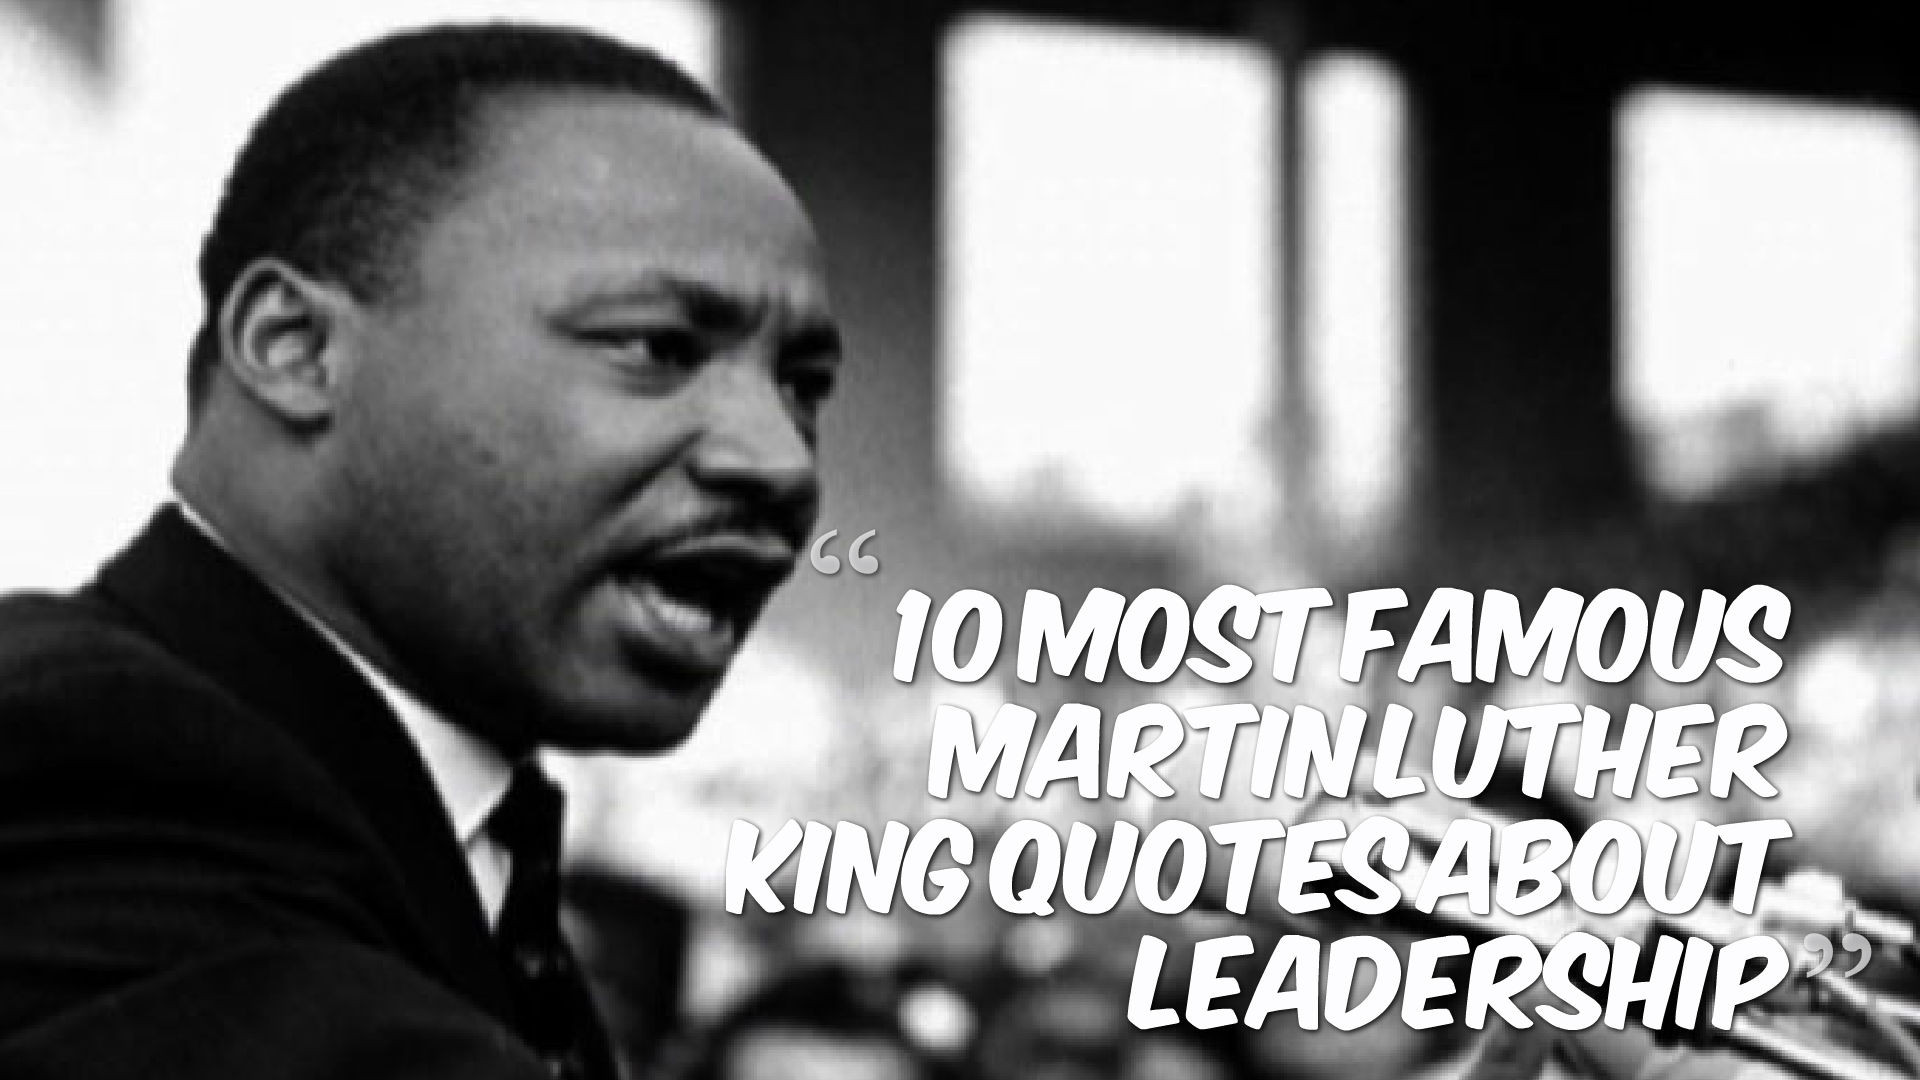 Mlk Quotes Leadership
 Quotes about Leadership martin luther king 24 quotes